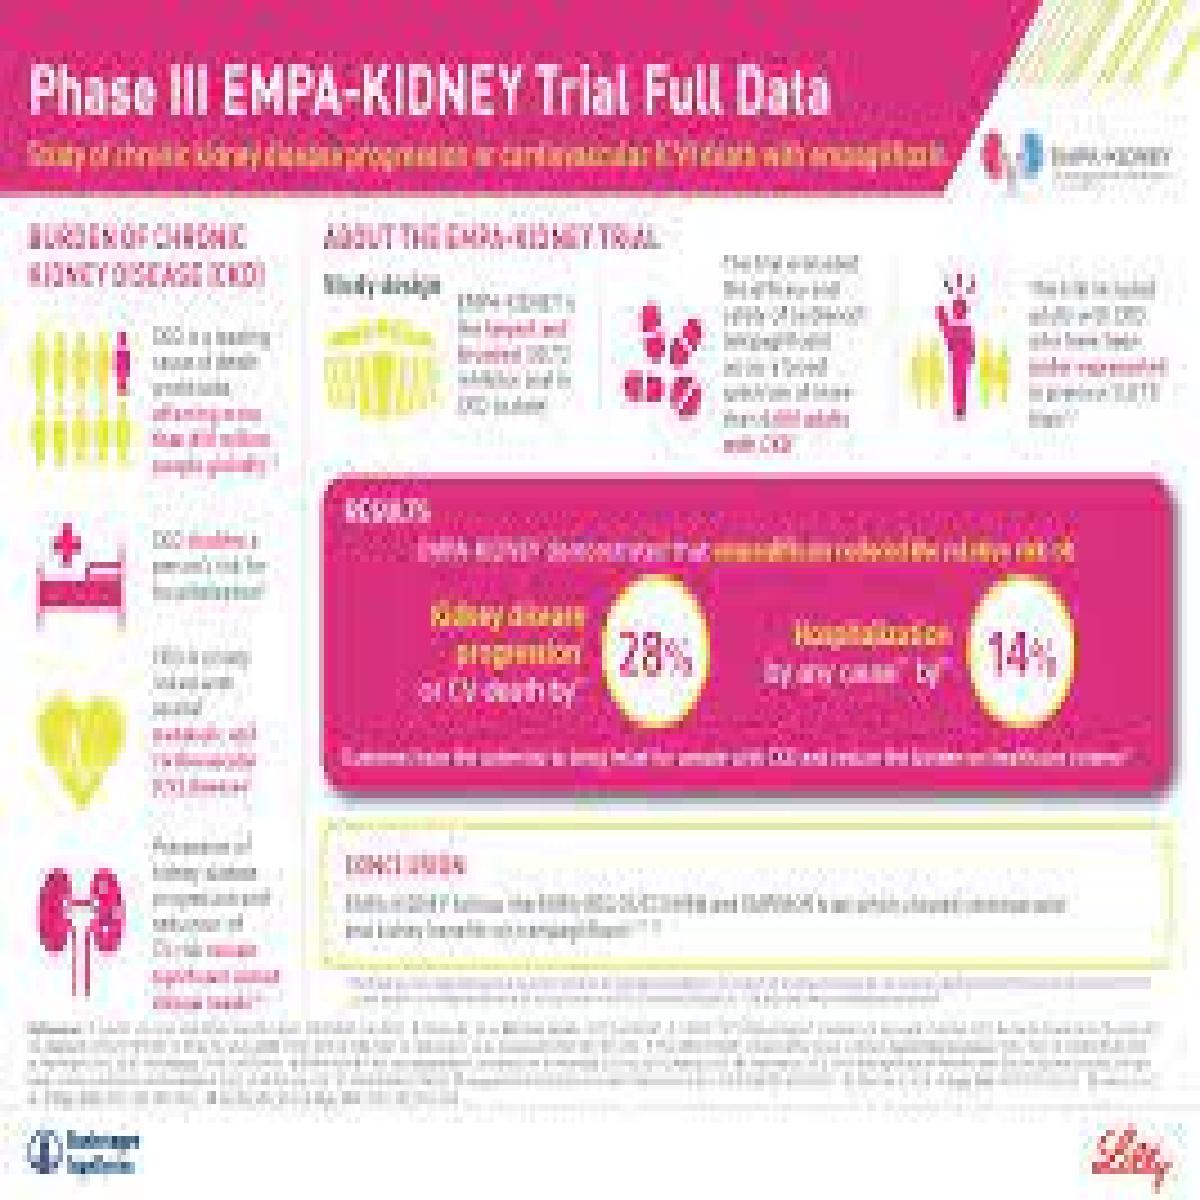 Landmark EMPA-KIDNEY trial showed significant benefit of Jardiance® in reducing kidney disease progression or cardiovascular death by 28% vs. placebo in people with chronic kidney disease